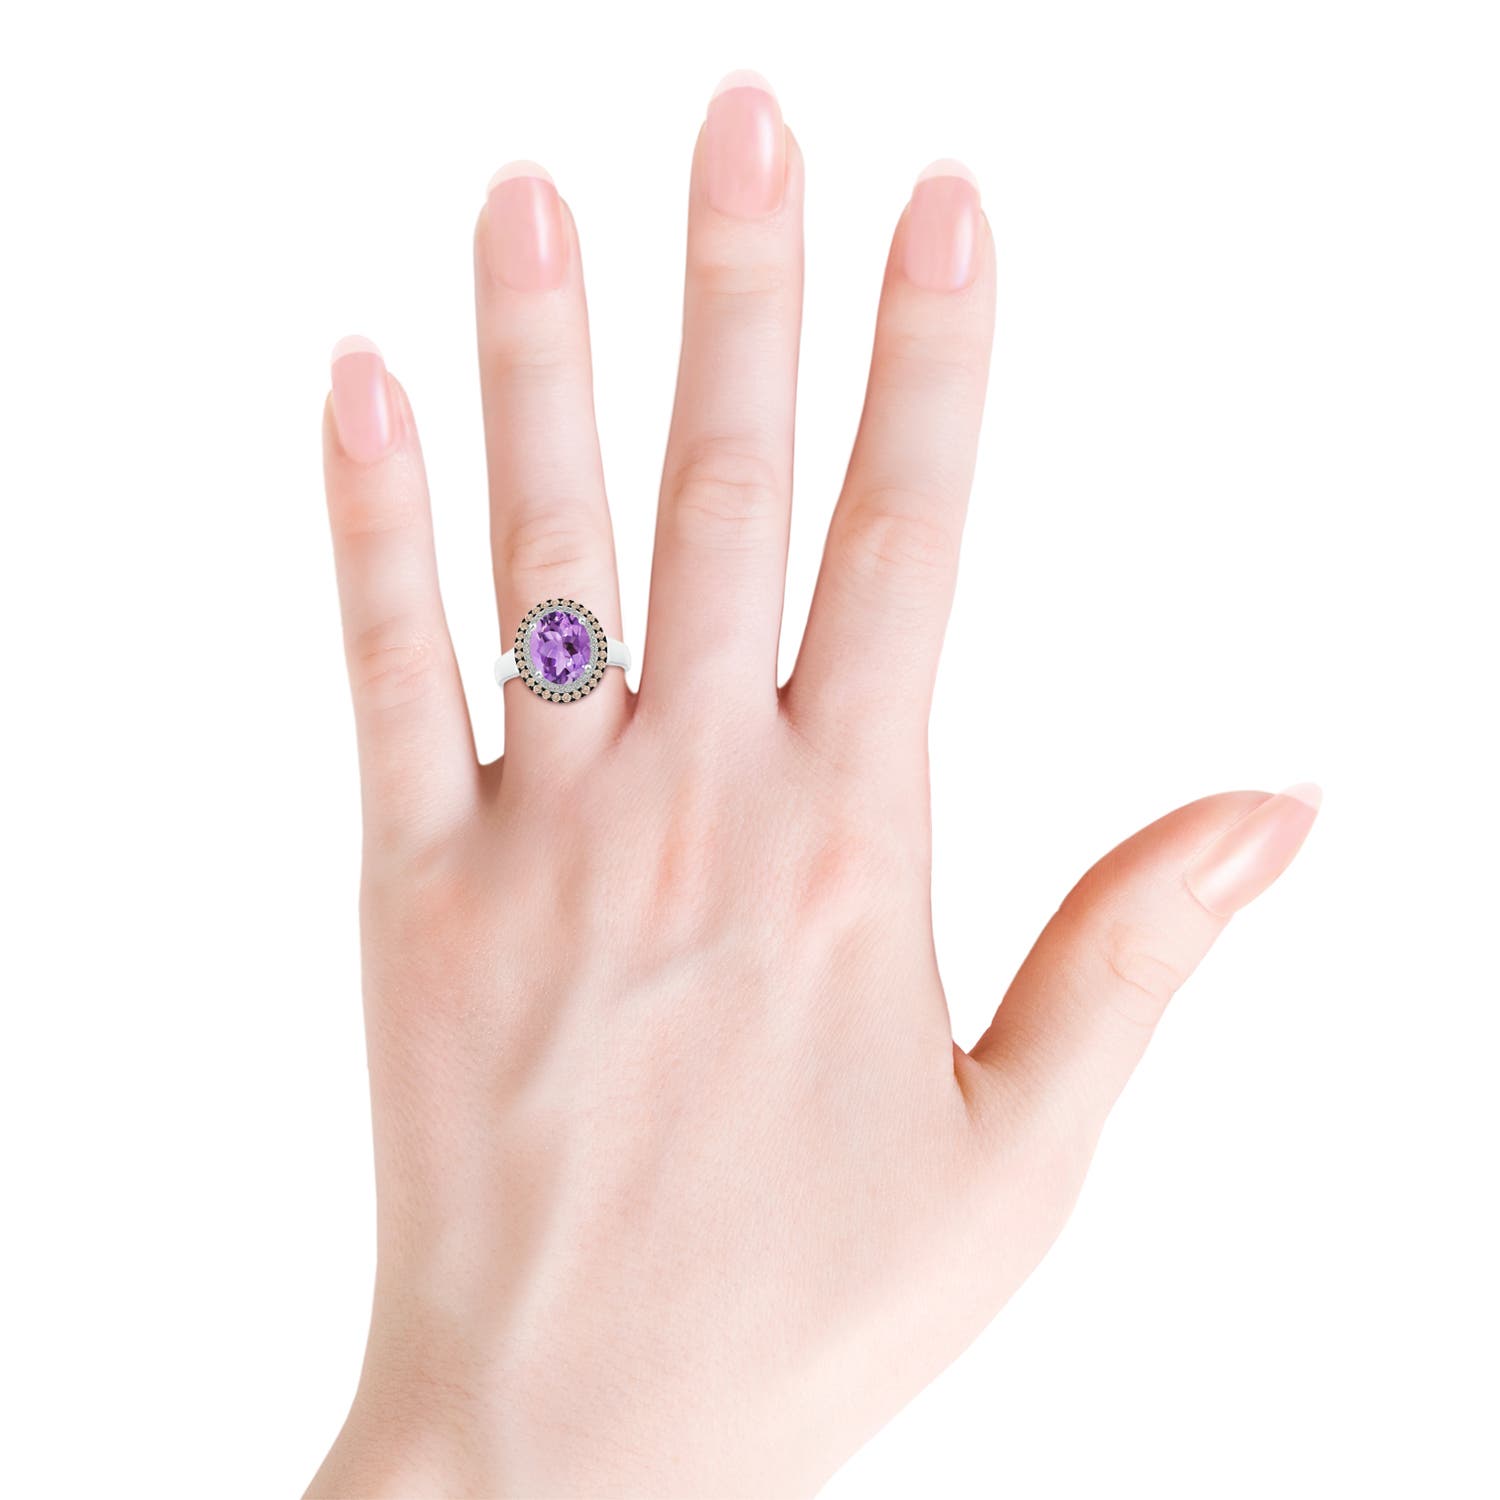 A - Amethyst / 2.7 CT / 14 KT White Gold